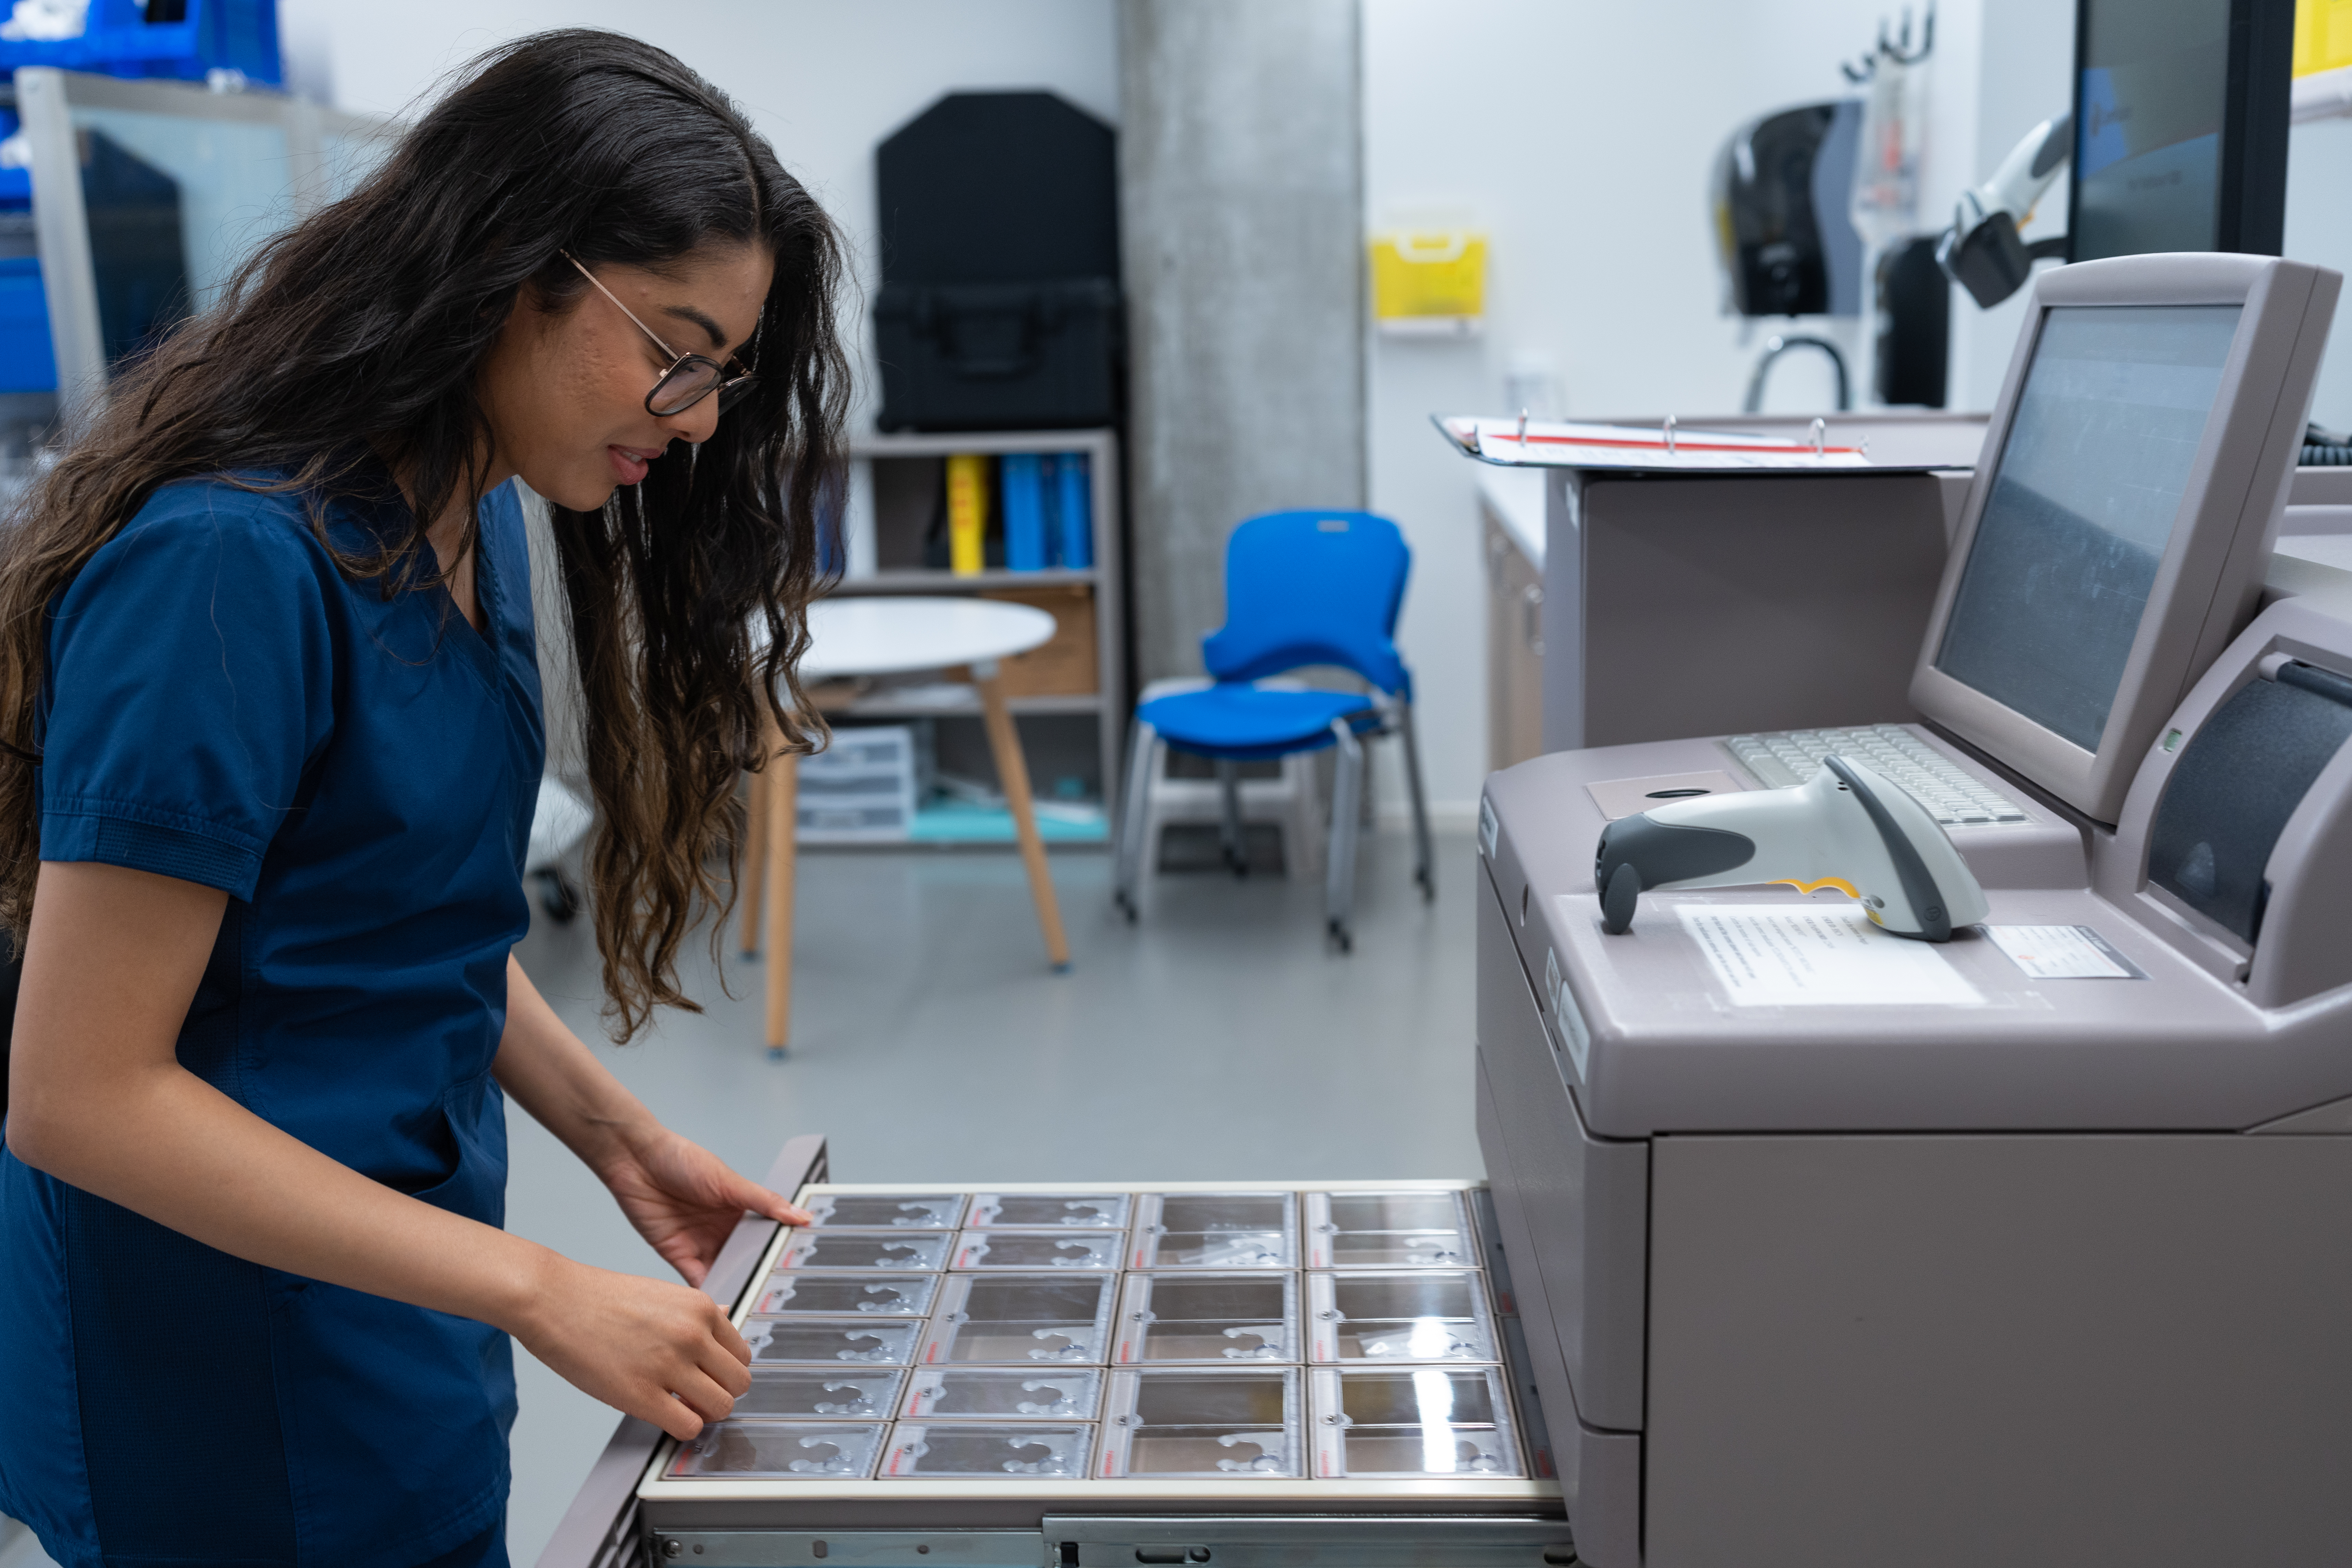 A nursing student standing looking at images from an x-ray scan